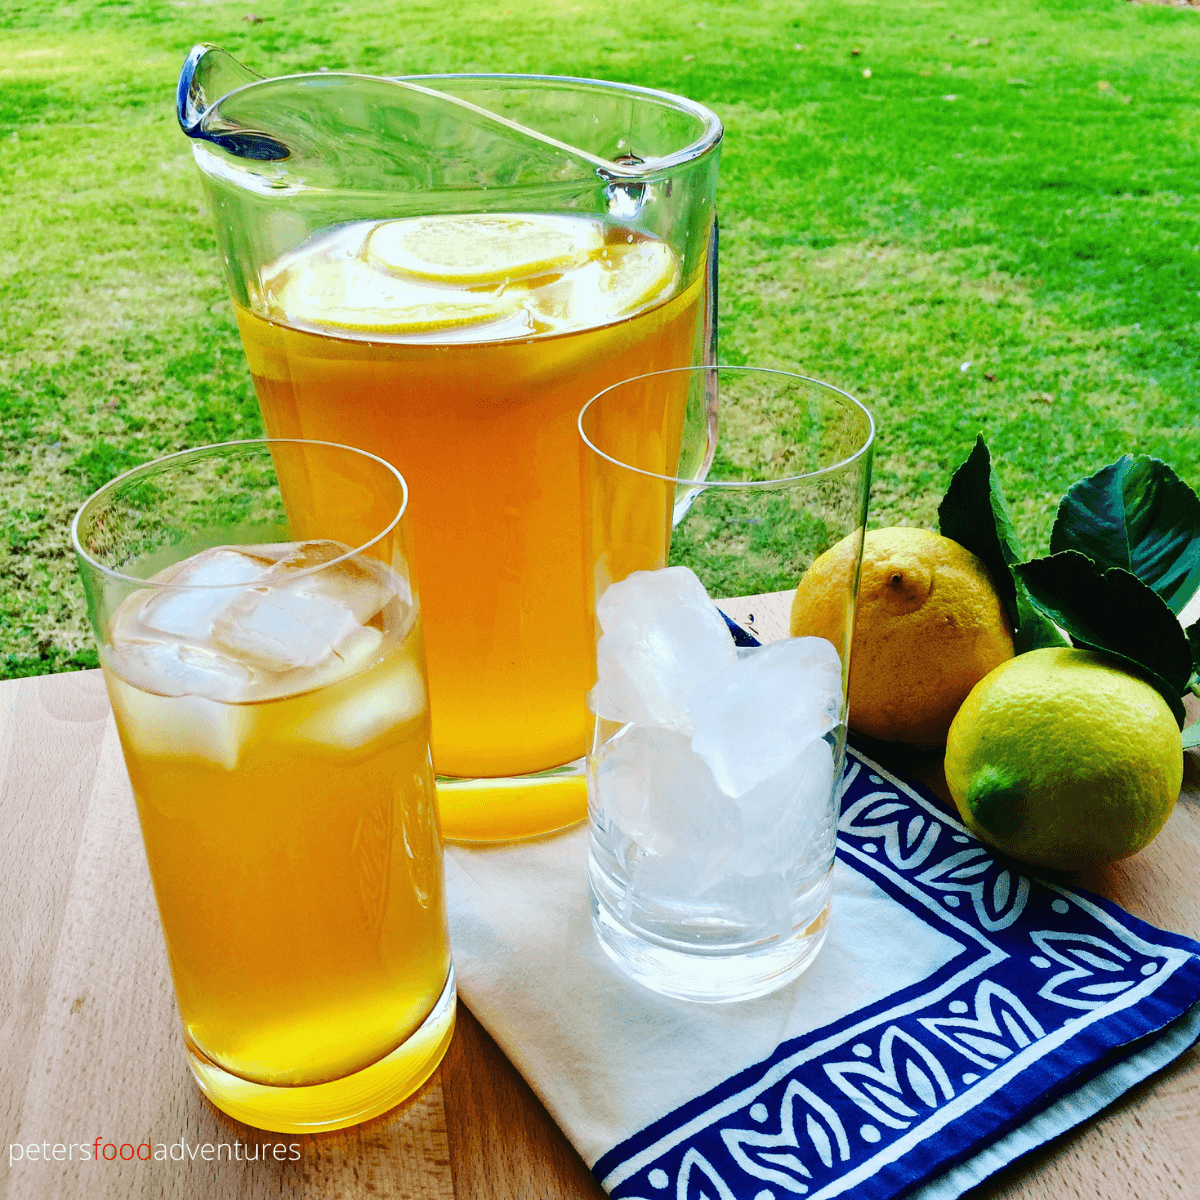 Homemade Lemon Iced Tea recipe. This classic recipe perfect for the summer. Full of antixodants, and you get to control the sugar! So easy to make with freshly lemons and black tea!